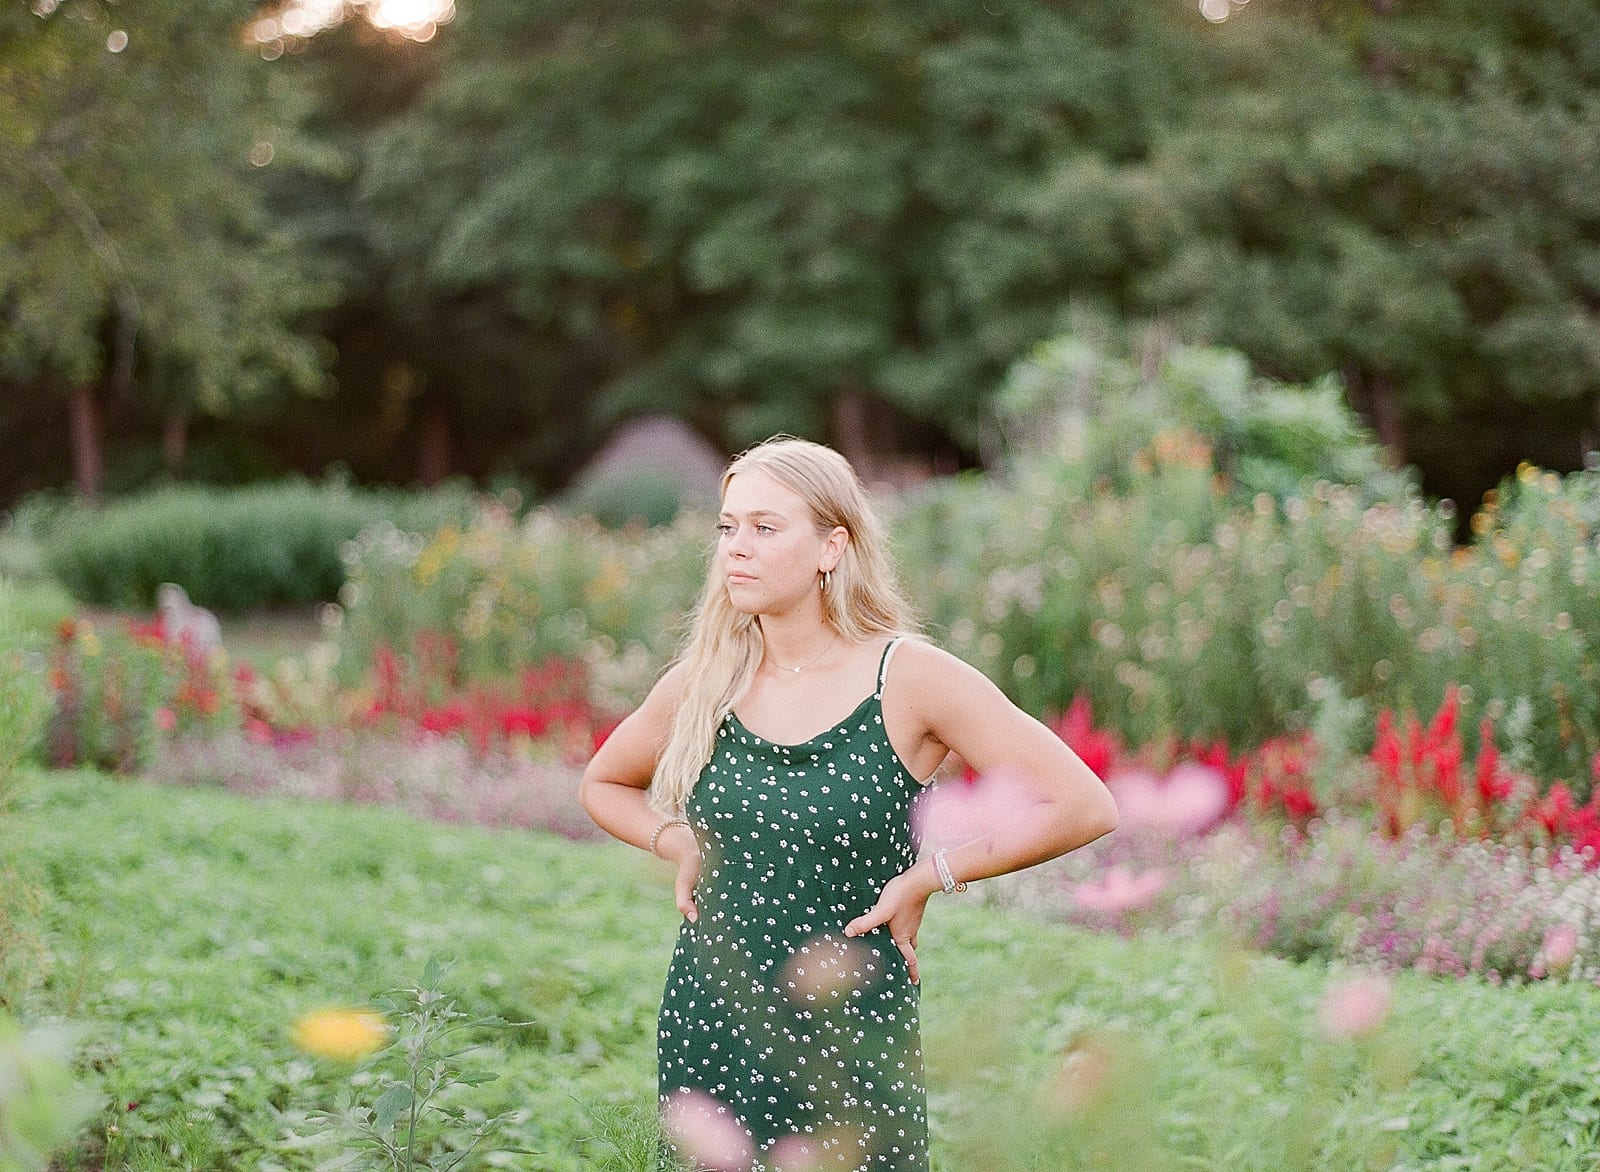 Top Tips For The Best Senior Photos Girl in Garden with Hands on Hips Photo